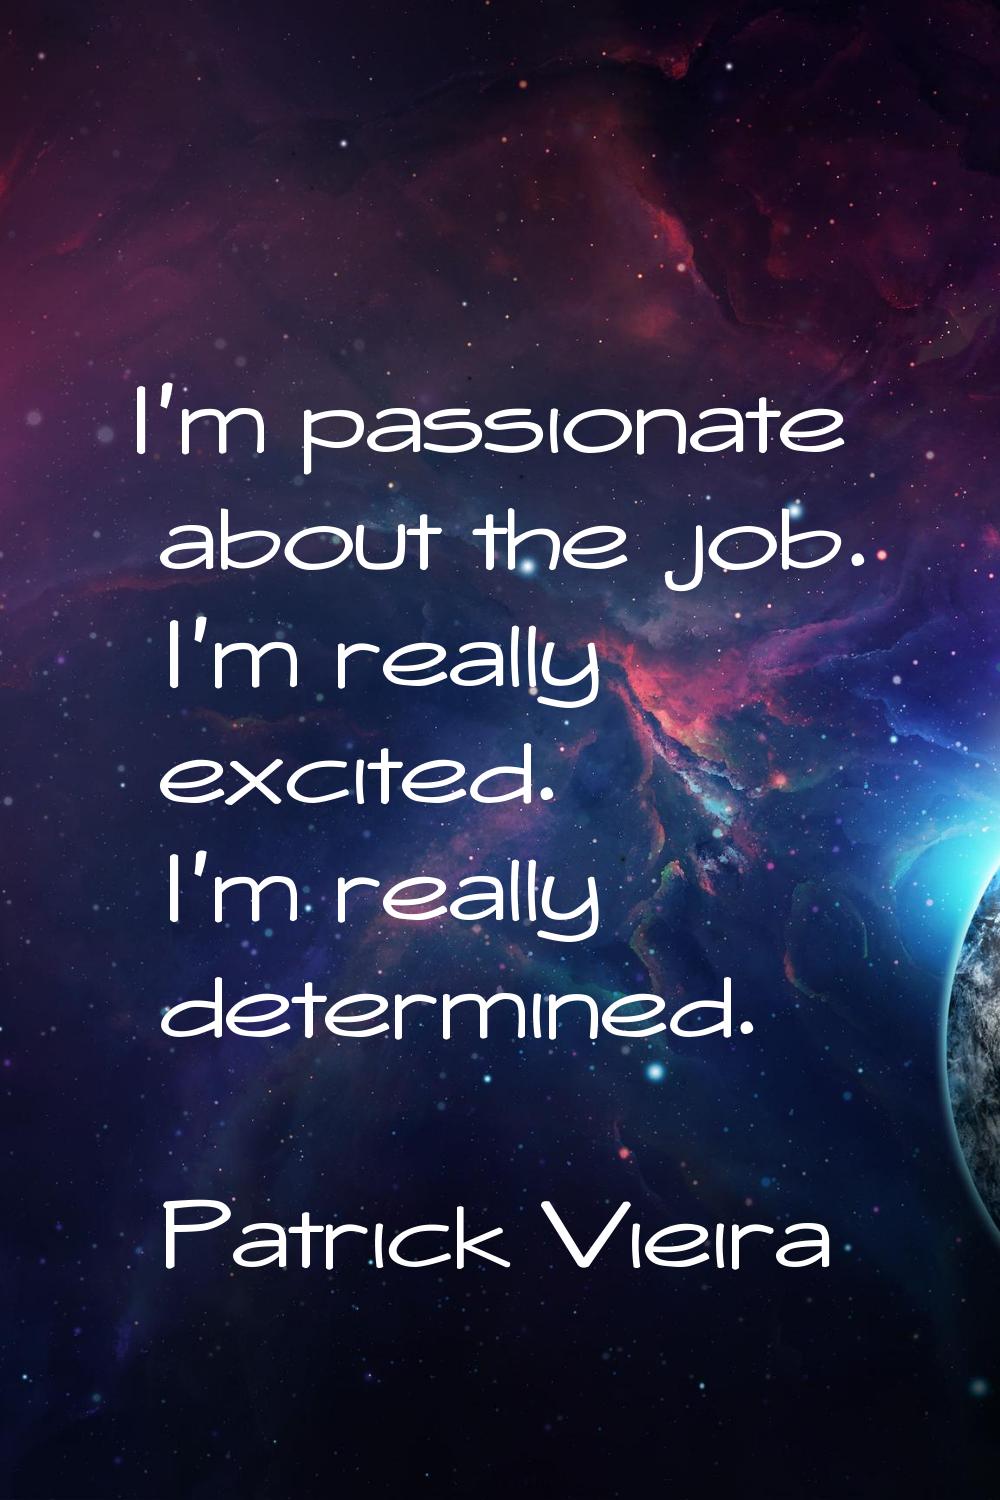 I'm passionate about the job. I'm really excited. I'm really determined.